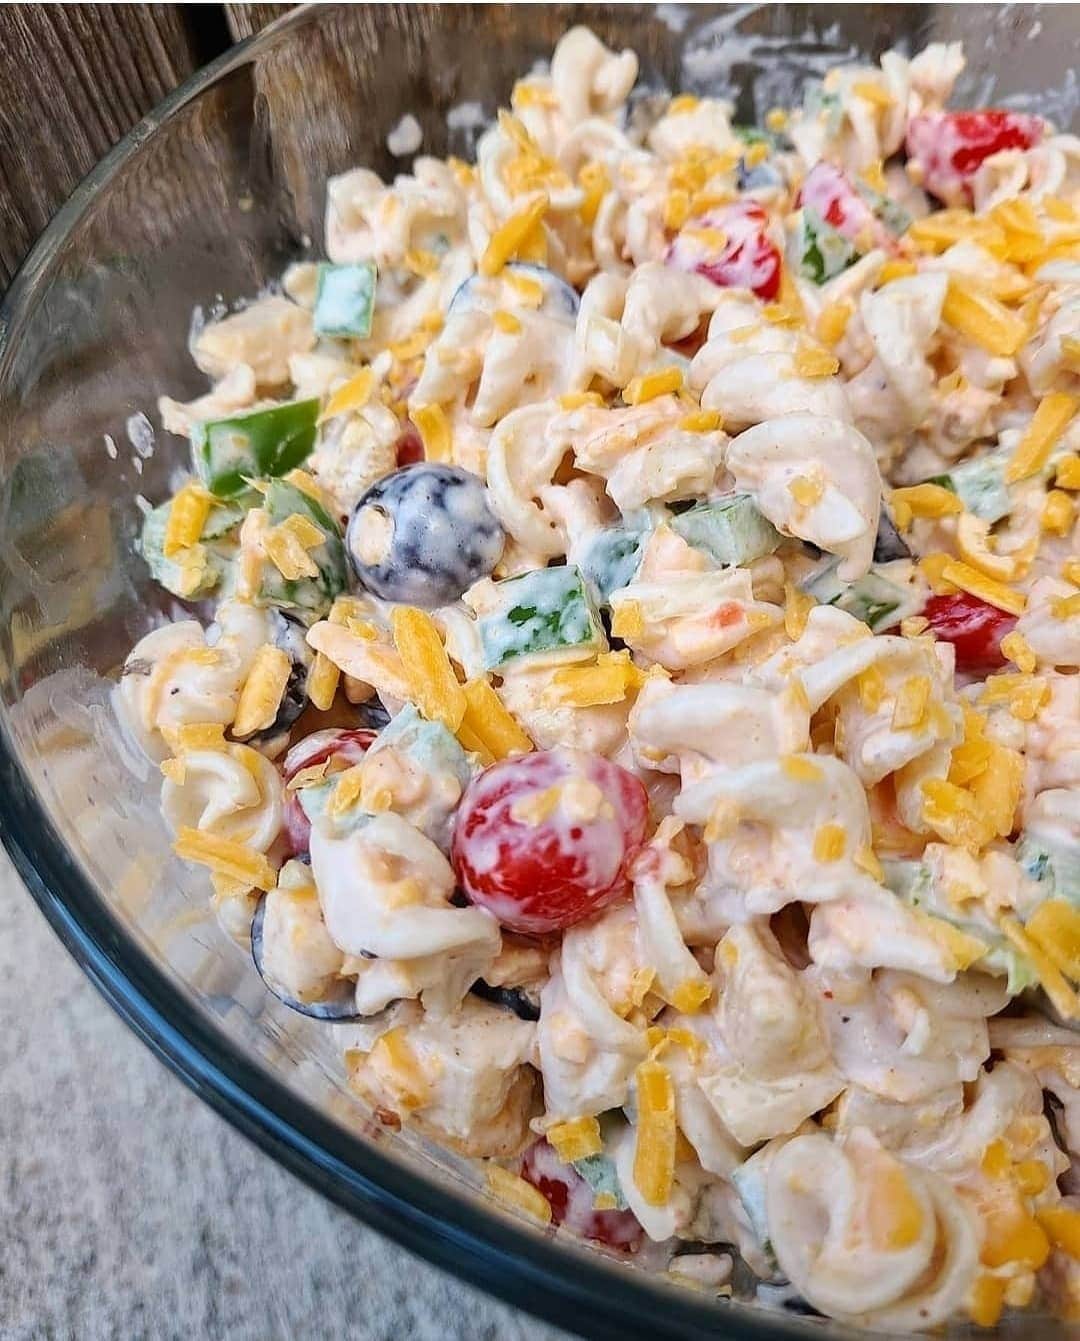 Flavorgod Seasoningsさんのインスタグラム写真 - (Flavorgod SeasoningsInstagram)「🎉 KETO FIESTA RANCH PASTA SALAD 🎉 by customer @lowkarbkhaleesi⁠ -⁠ 1 Tbsp (each) @FlavorGod Taco Tuesday, Ranch, & Fiesta Sweet and Tangy seasoning⁠ -⁠ KETO friendly flavors available here ⬇️⁠ Click link in the bio -> @flavorgod⁠ www.flavorgod.com⁠ -⁠ Save this for your next family get together! It's so good, no one will ever suspect it's #lowcarbpasta⁠ .⁠ .⁠ 8 oz @GreatLowCarb rotini pasta⁠ 6 oz black olives, diced⁠ 1 can Dynasty baby corn, diced (asian section at Walmart)⁠ 1 bell pepper, diced⁠ 1 cup tomato, chopped⁠ 1/2 small onion, diced⁠ 1 1/2 cups shredded cheddar cheese⁠ ▪︎▪︎▪︎⁠ Dressing:⁠ 1 cup mayo⁠ 1/2 cup heavy cream⁠ 1 Tbsp lemon juice⁠ 1 Tbsp (each) @FlavorGod Taco Tuesday, Ranch, & Fiesta Sweet and Tangy seasoning⁠ ▪︎▪︎▪︎⁠ Boil pasta for 10-12 minutes. Drain and let cool. Combine with olives, baby corn, bell pepper, tomato, onion, & cheese. Whisk together dressing ingredients then pour over everything. Stir together and refrigerate at least 4 hours (I like to let it sit overnight. The longer the better)⁠ .⁠ .⁠ 👉 This makes a large bowl of pasta salad! 》divided into 12 servings it is 5 net carbs each. Want to cut the carb count even further?? Use fresh zoodles instead of pasta or diced chicken for a flavorful chicken salad⁠ -⁠ Flavor God Seasonings are:⁠ ✅ZERO CALORIES PER SERVING⁠ ✅MADE FRESH⁠ ✅MADE LOCALLY IN US⁠ ✅FREE GIFTS AT CHECKOUT⁠ ✅GLUTEN FREE⁠ ✅#PALEO & #KETO FRIENDLY⁠ -⁠ #food #foodie #flavorgod #seasonings #glutenfree #mealprep #seasonings #breakfast #lunch #dinner #yummy #delicious #foodporn」2月19日 9時01分 - flavorgod